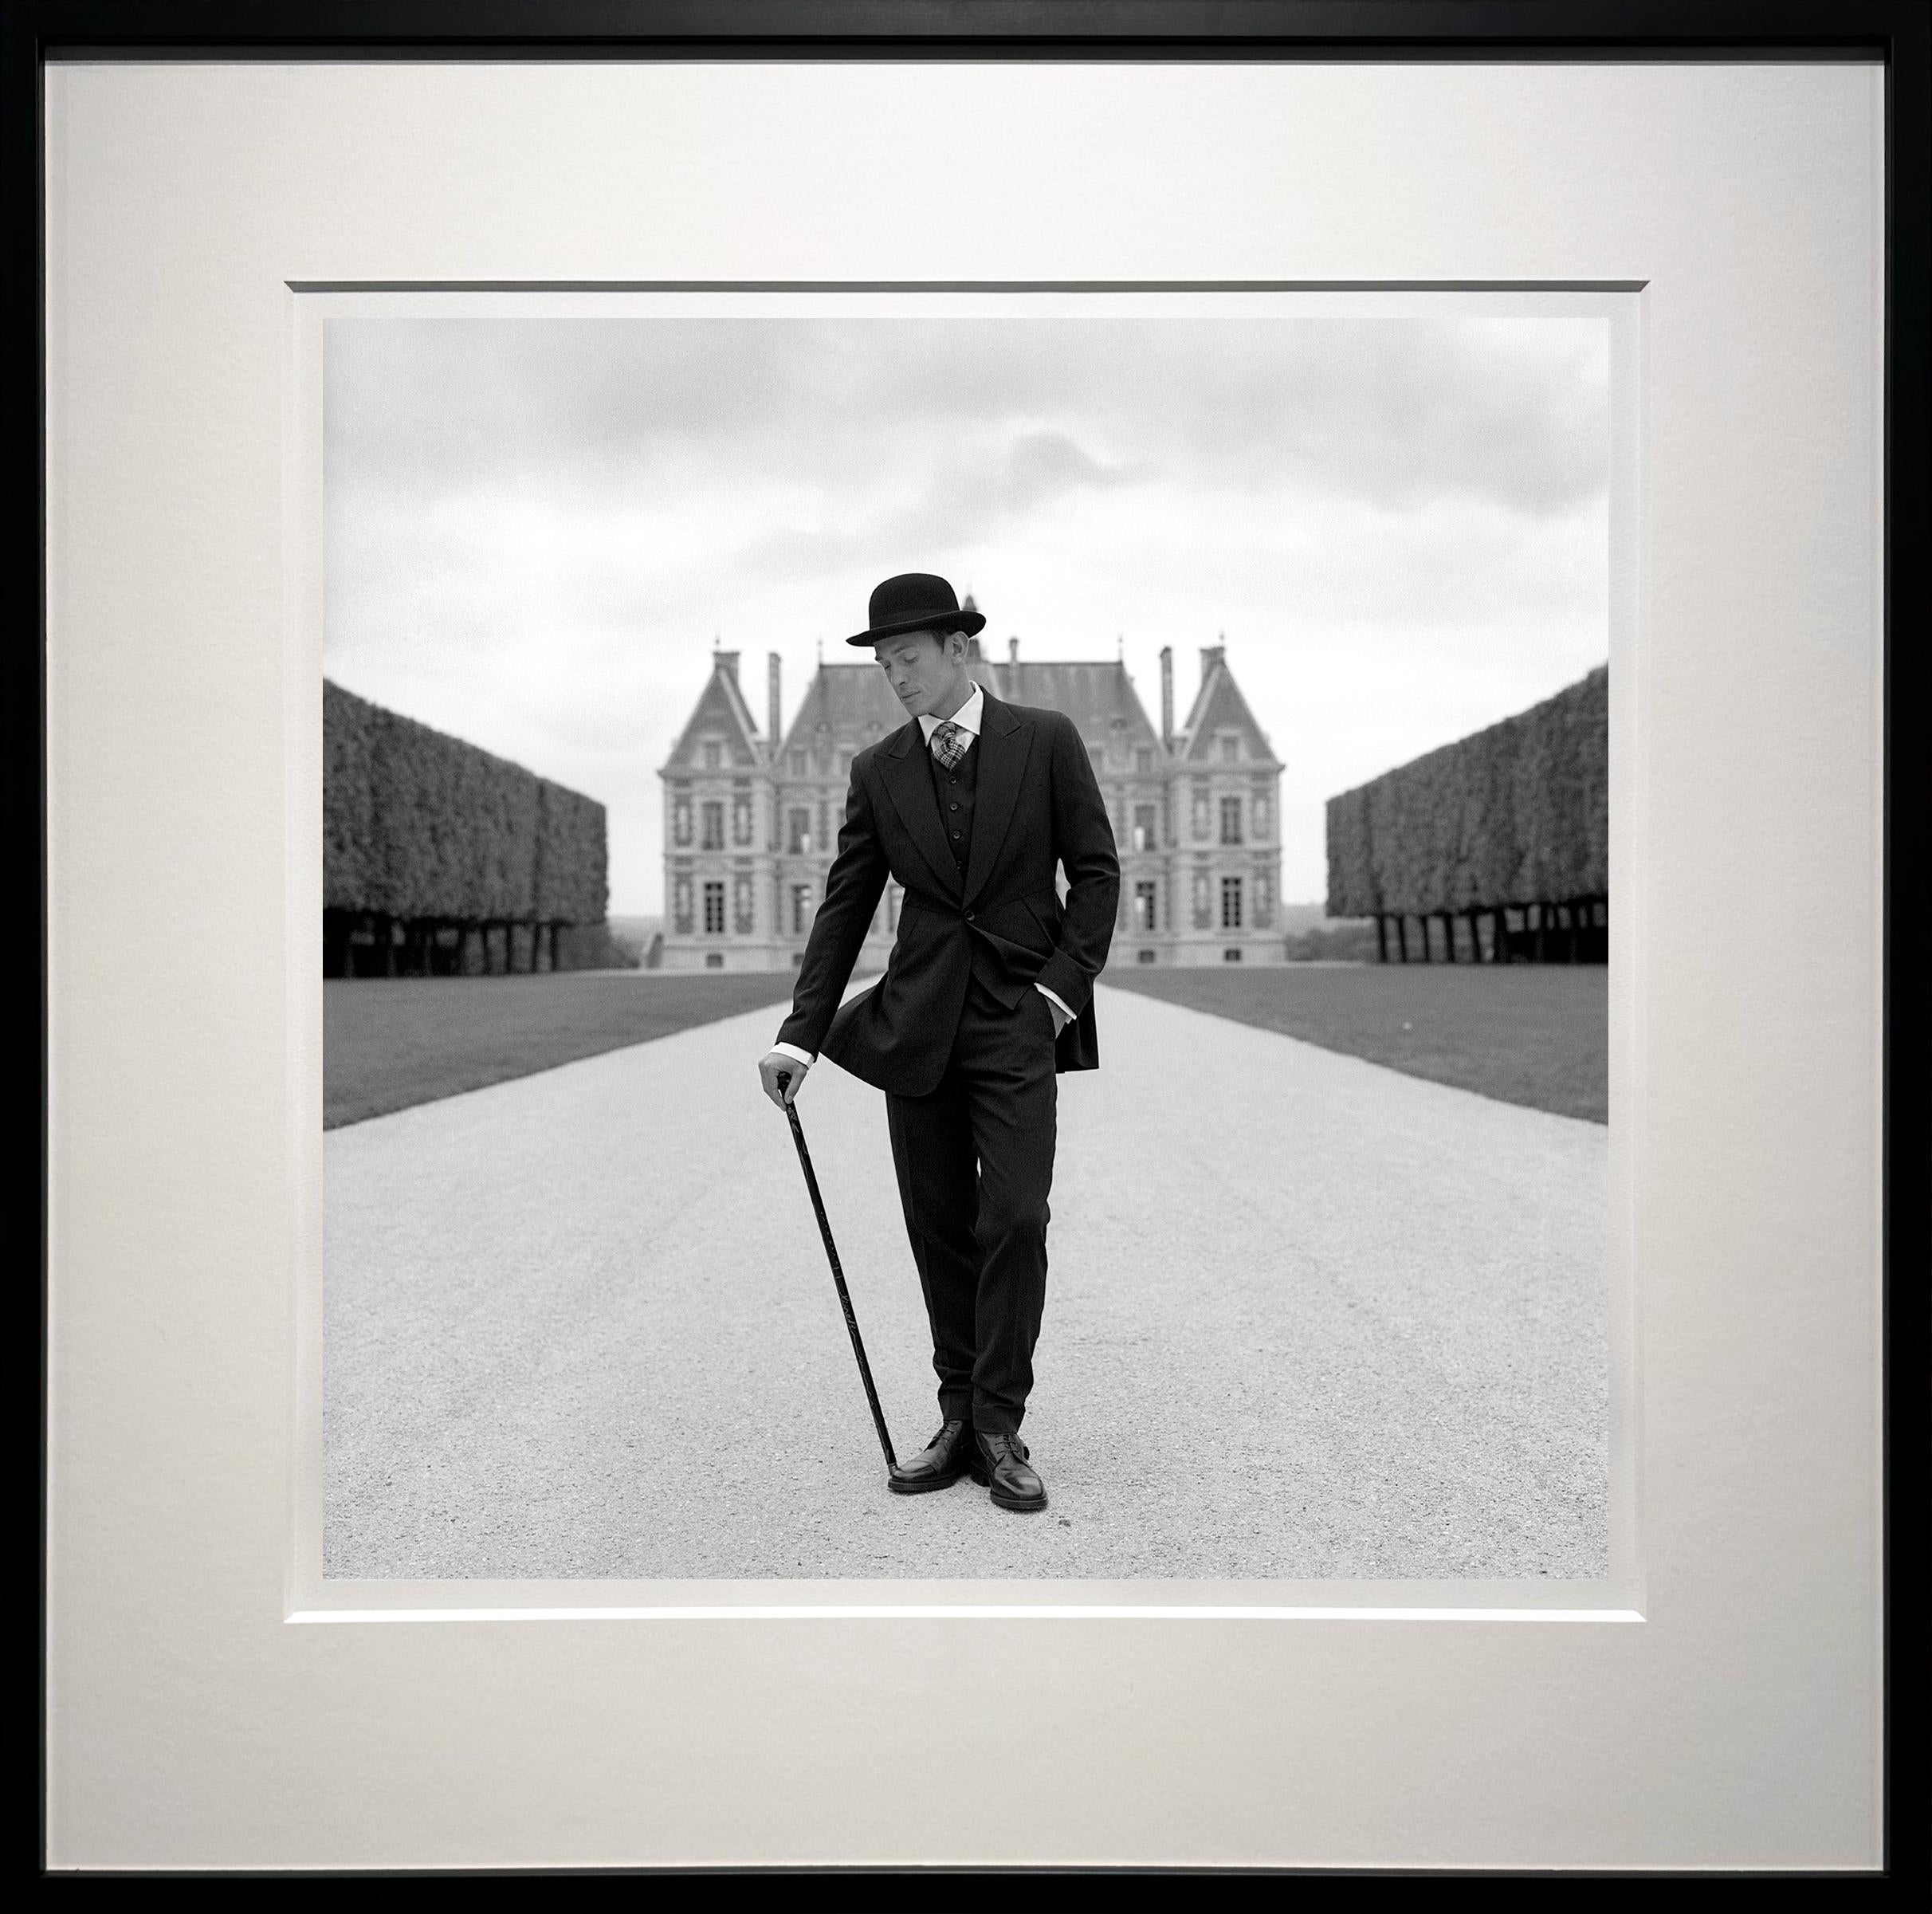 Rodney Smith Black and White Photograph - Gary with Cane, Parc de Sceaux, France - 30 x 30 inches, FRAMED